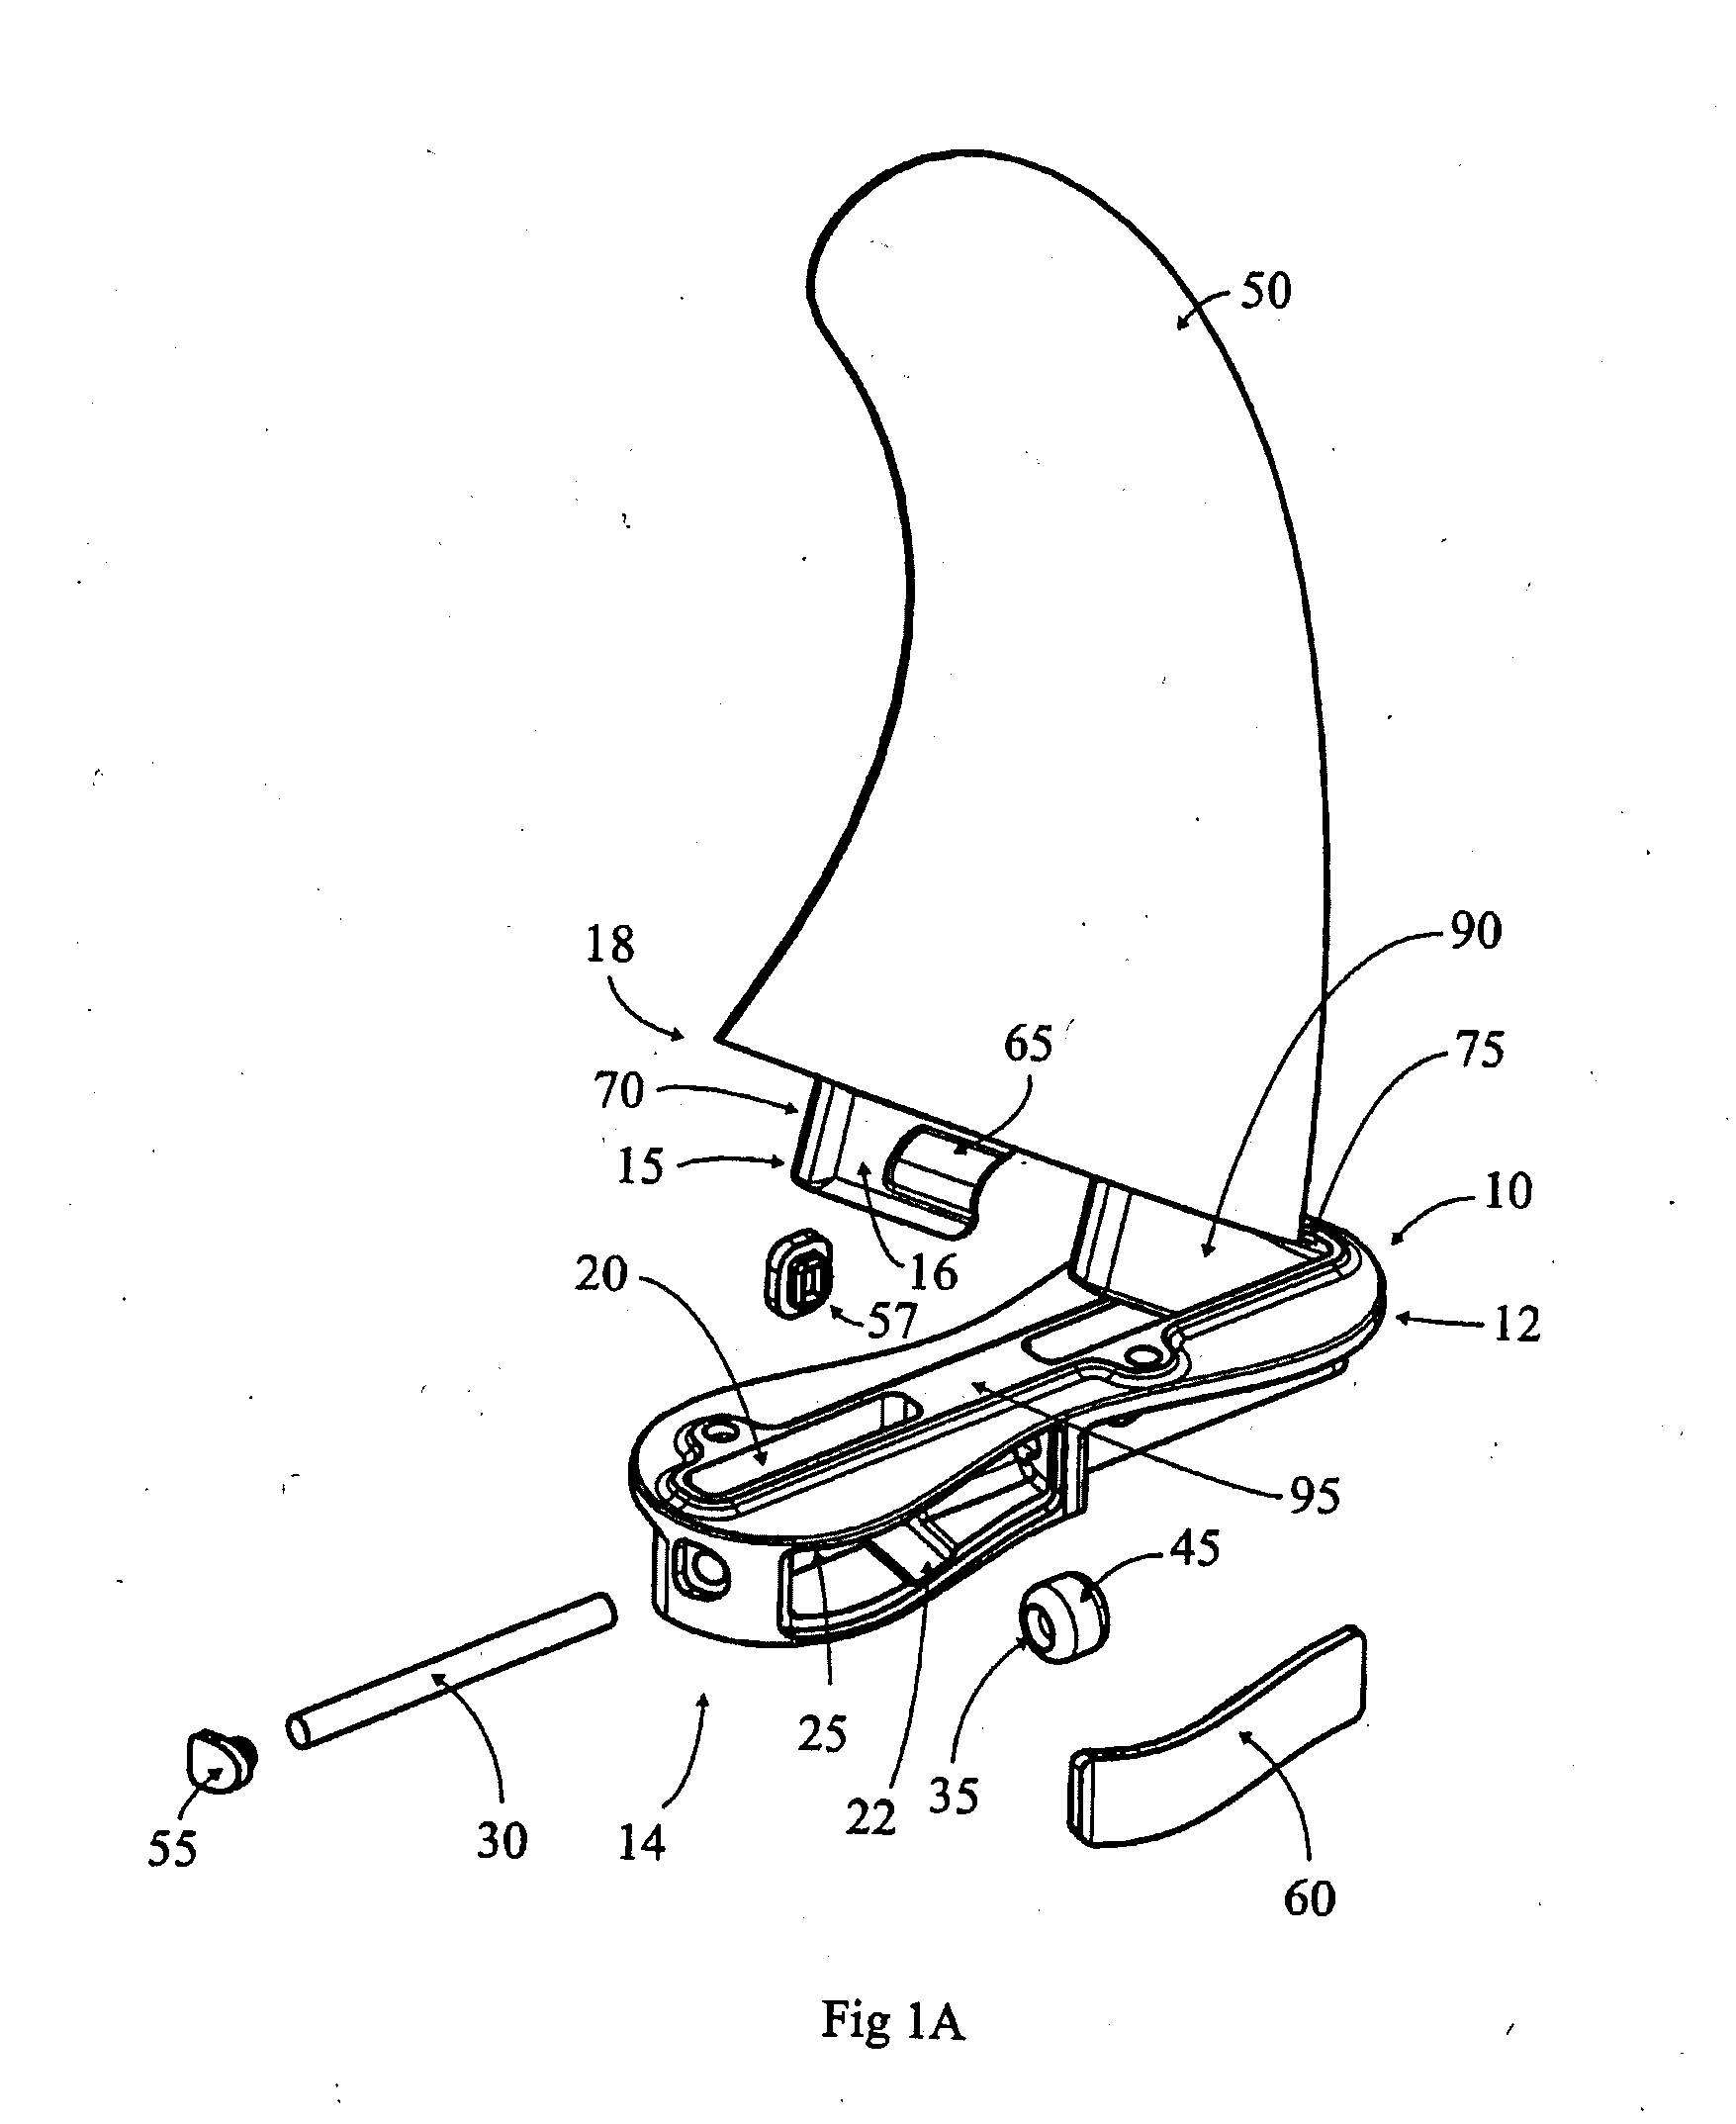 Fin plug for water craft